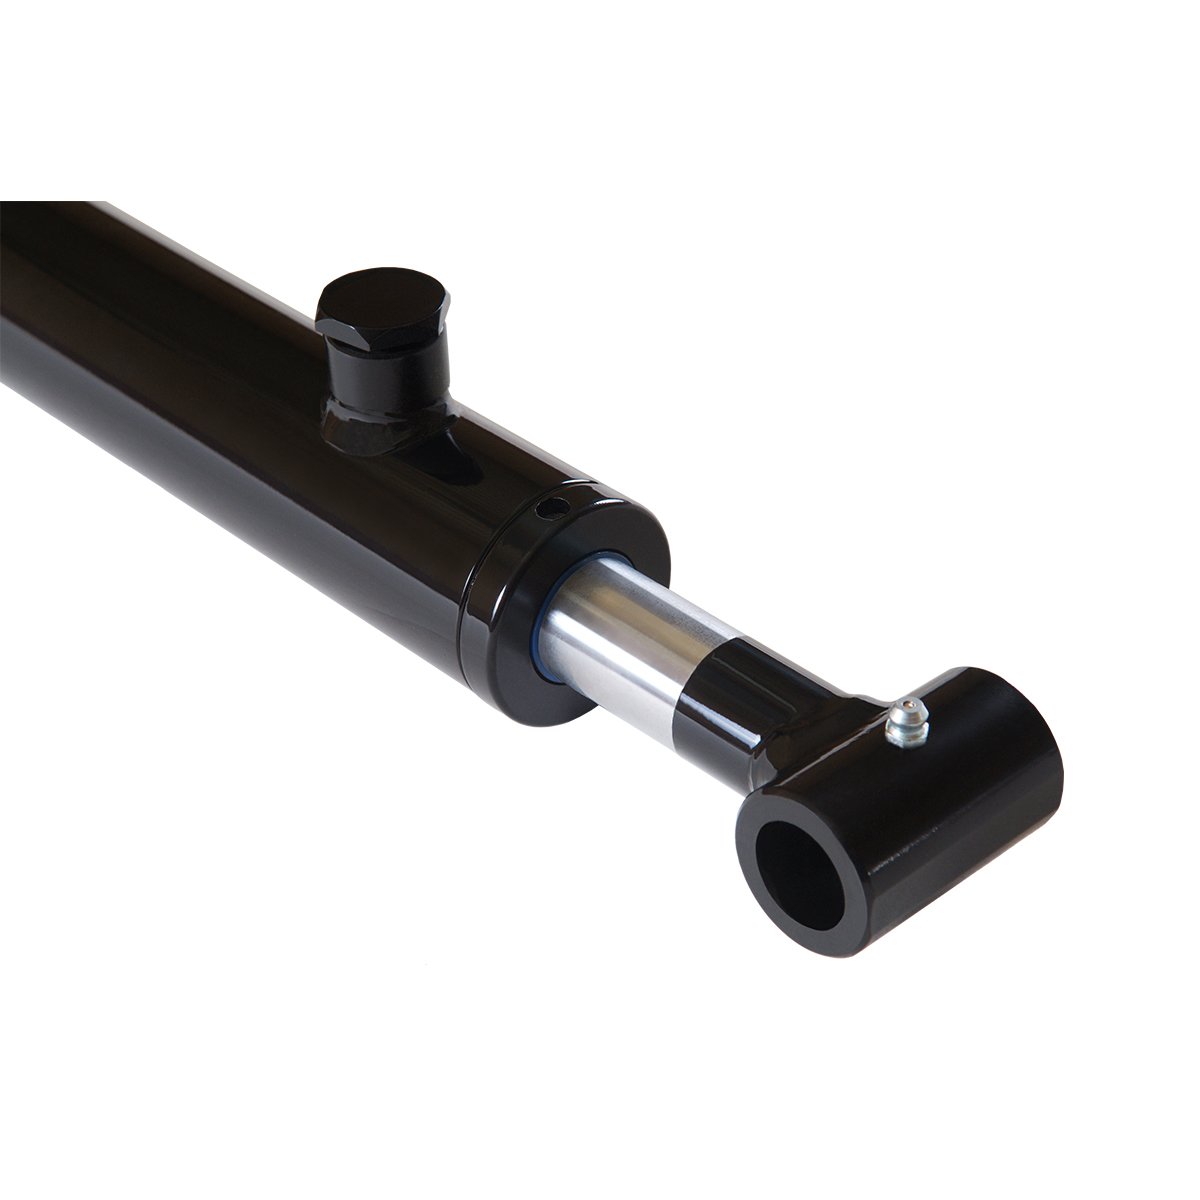 1.5 bore x 20 stroke hydraulic cylinder, welded cross tube double acting cylinder | Magister Hydraulics